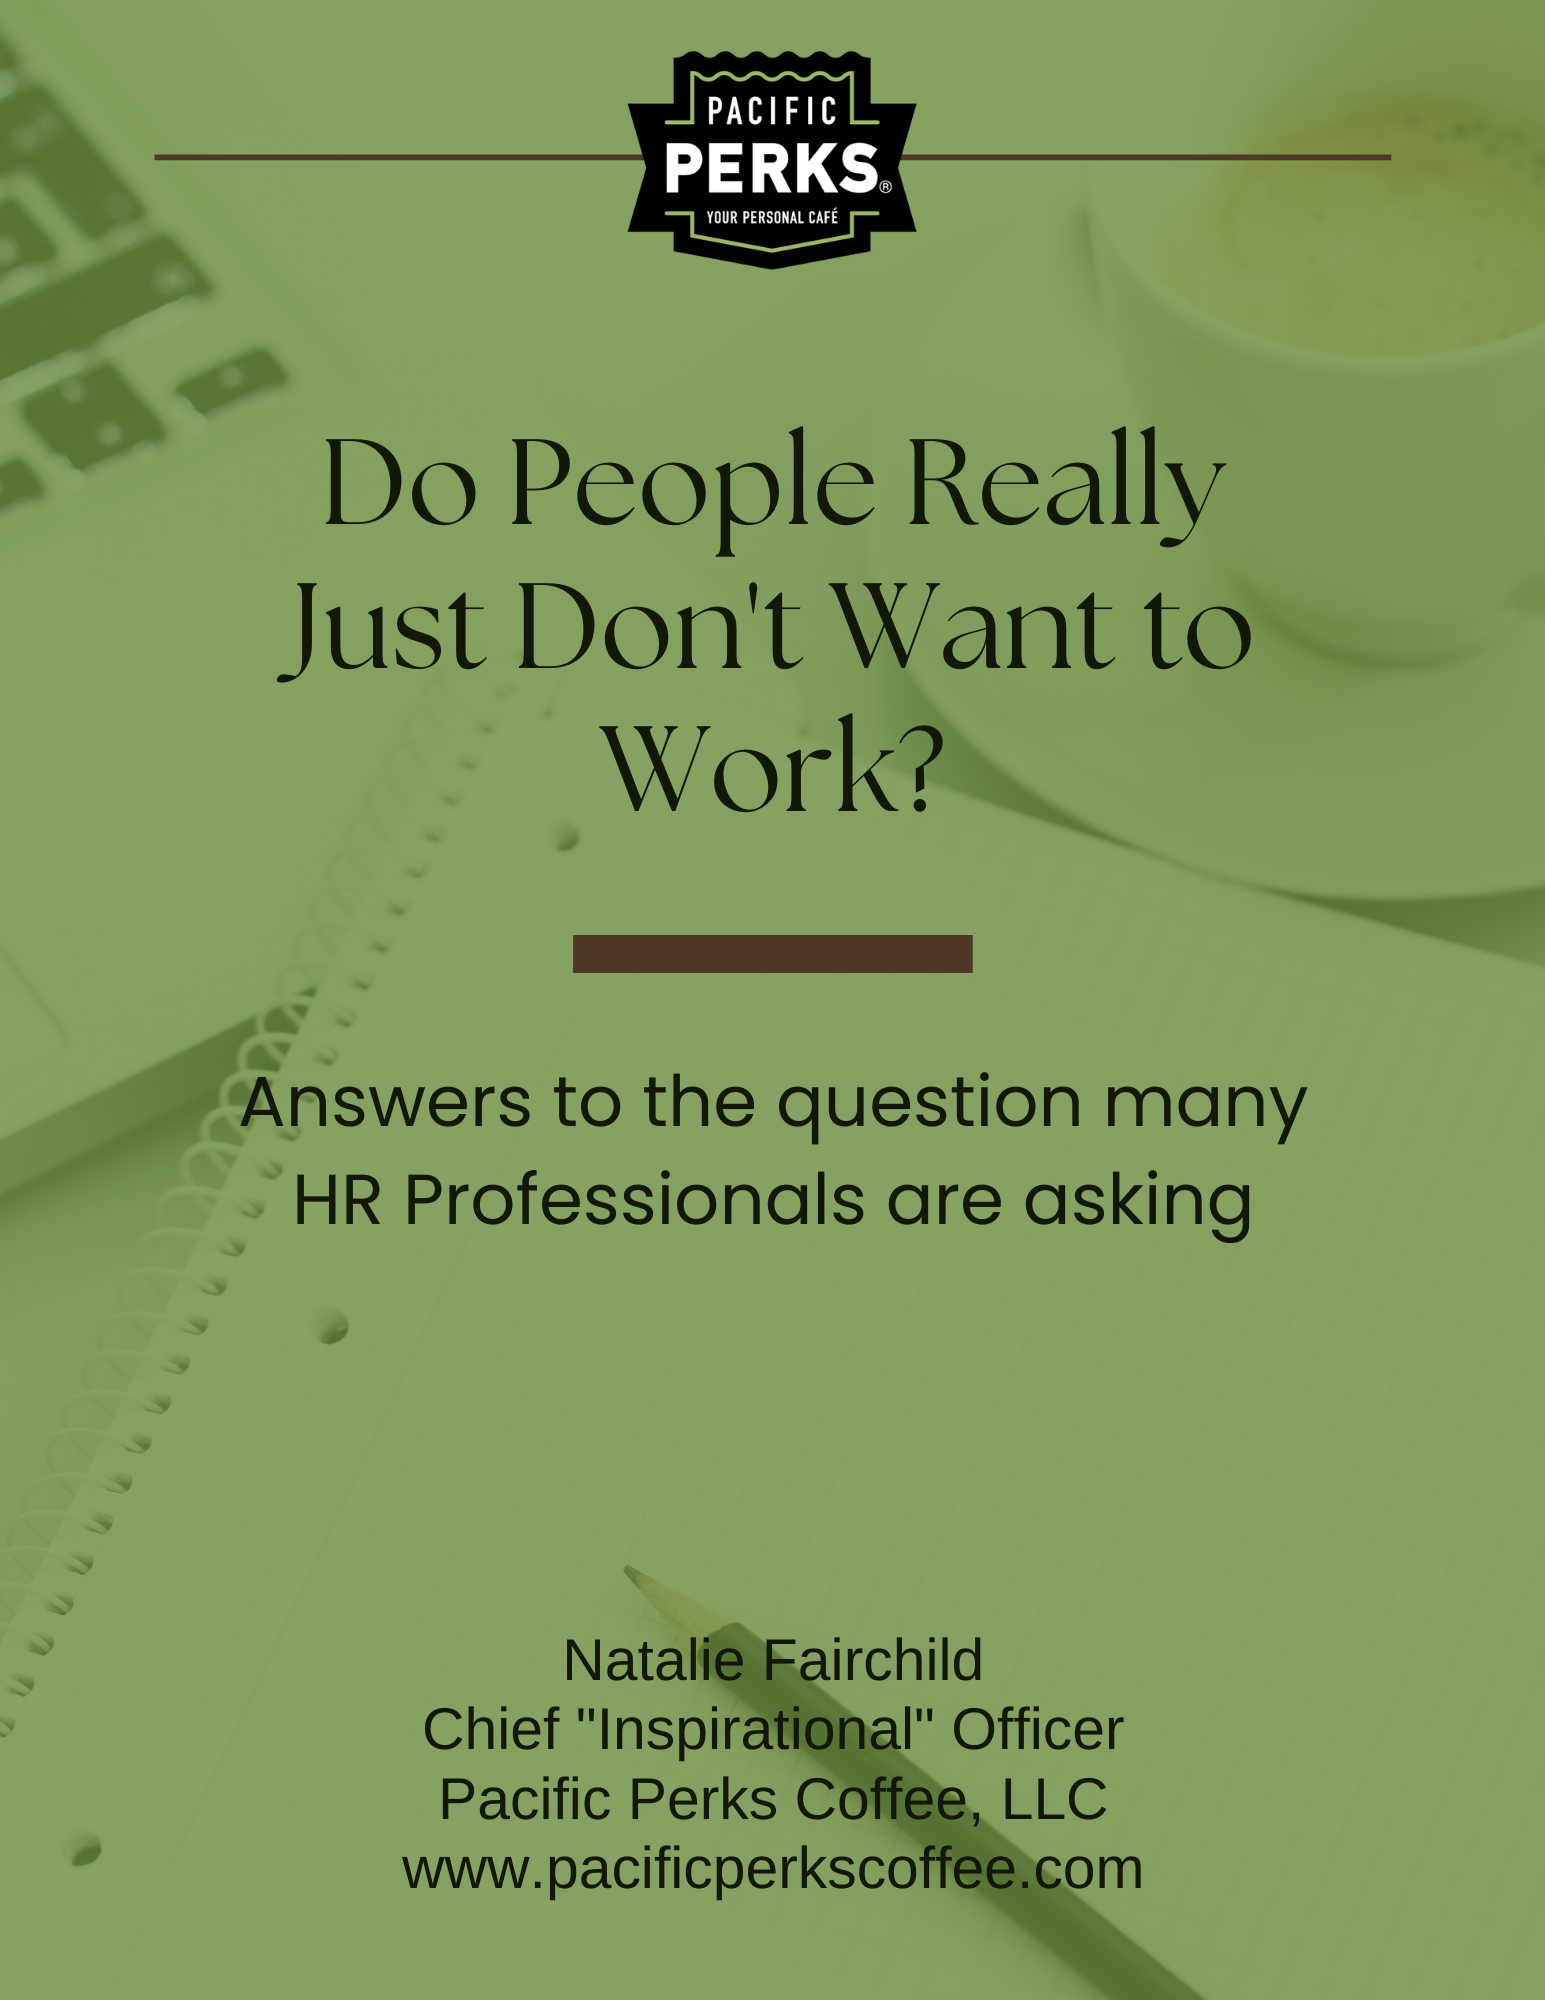 Do People Really Just Don't Want to Work? Answers to the questions many HR professionals are asking